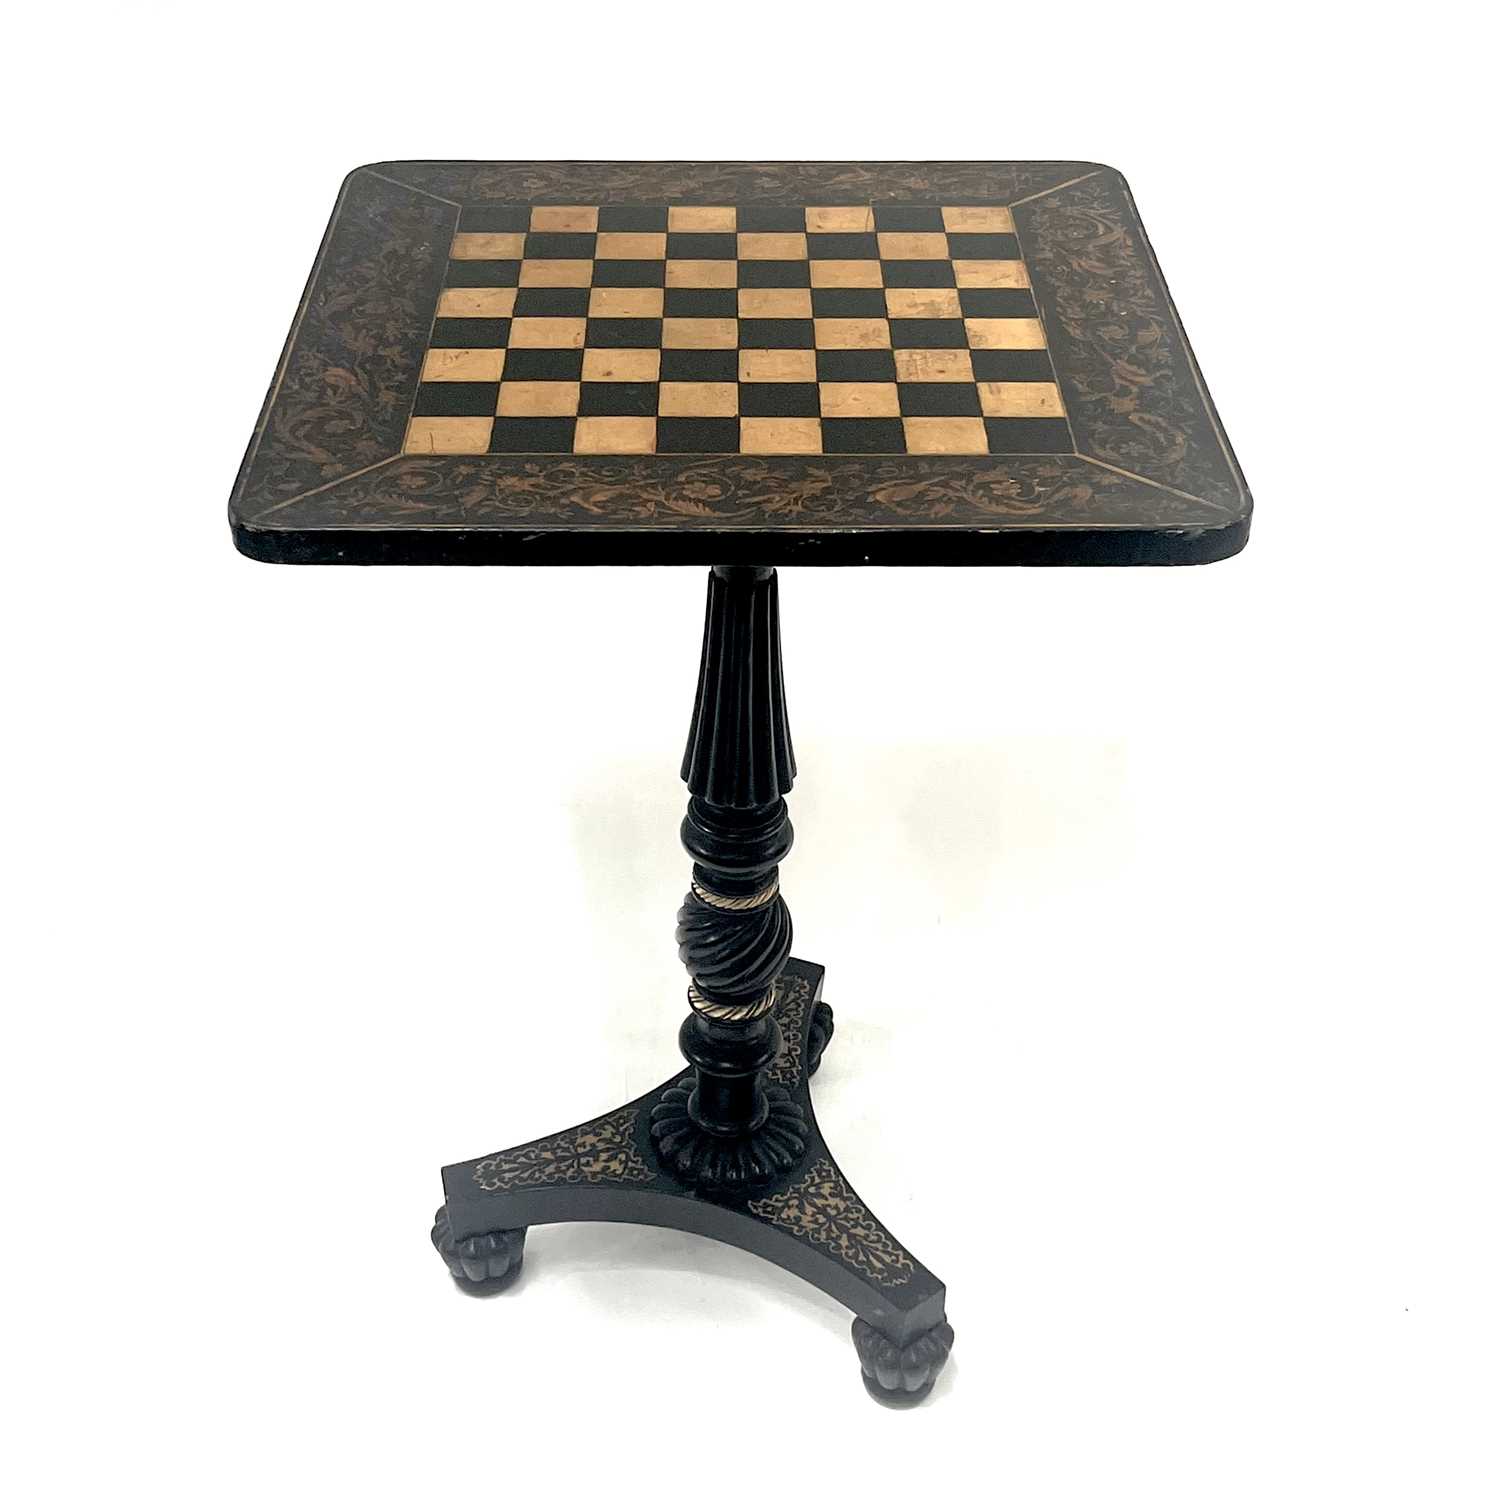 A Chinoiserie black lacquer and penwork games table, mid-19th Century, square tilt-top with chess